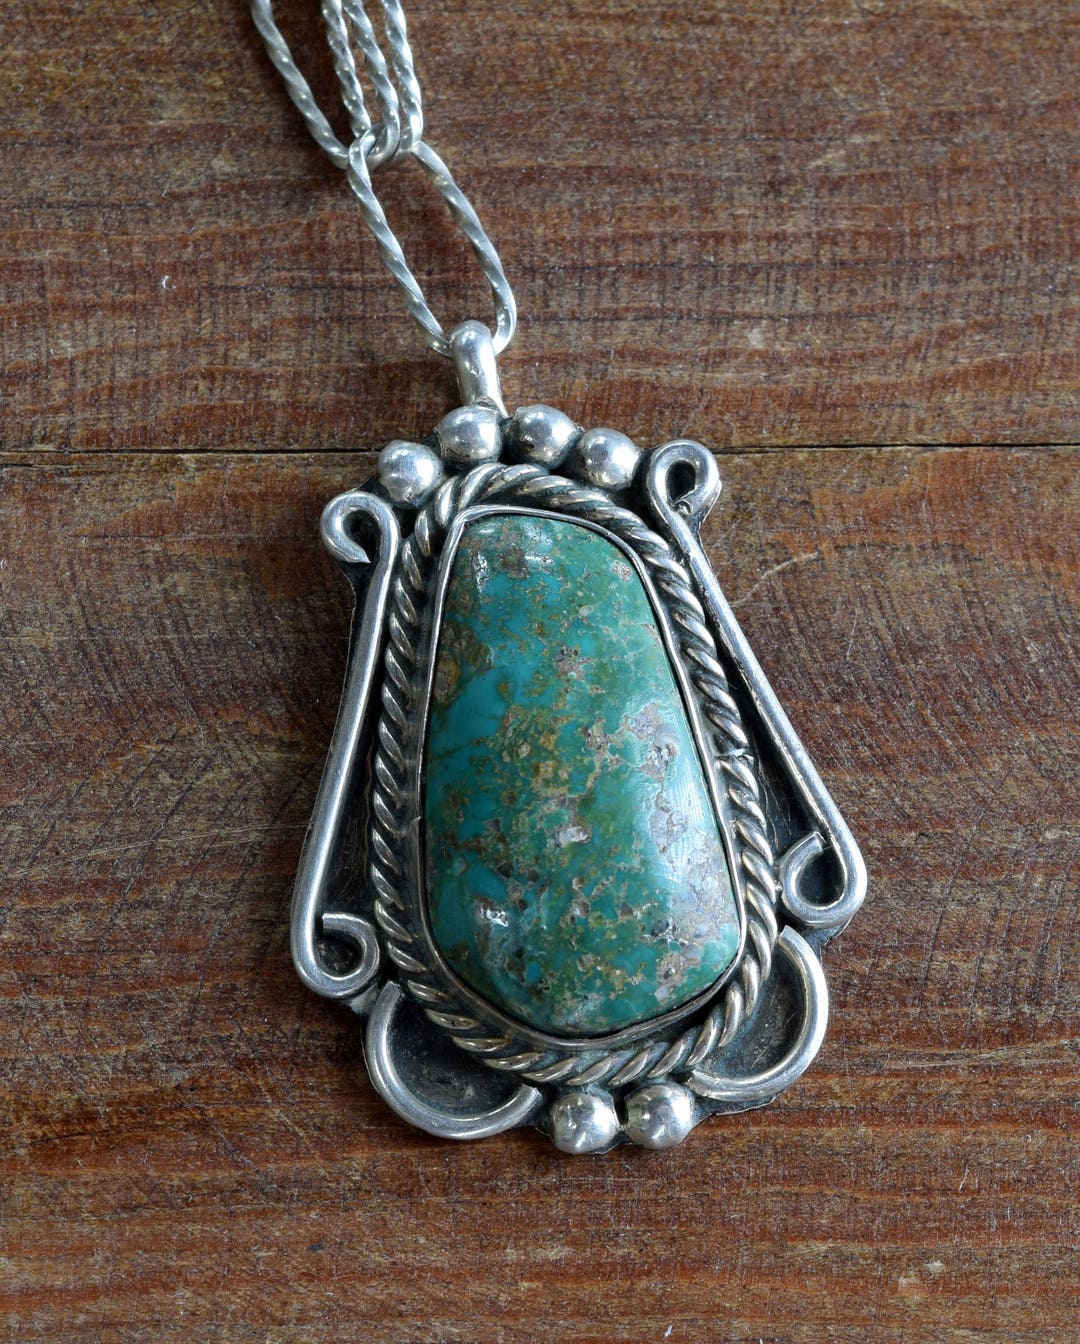 Handmade Sterling Silver Green Turquoise Pendant and Chain Necklace - Etsy